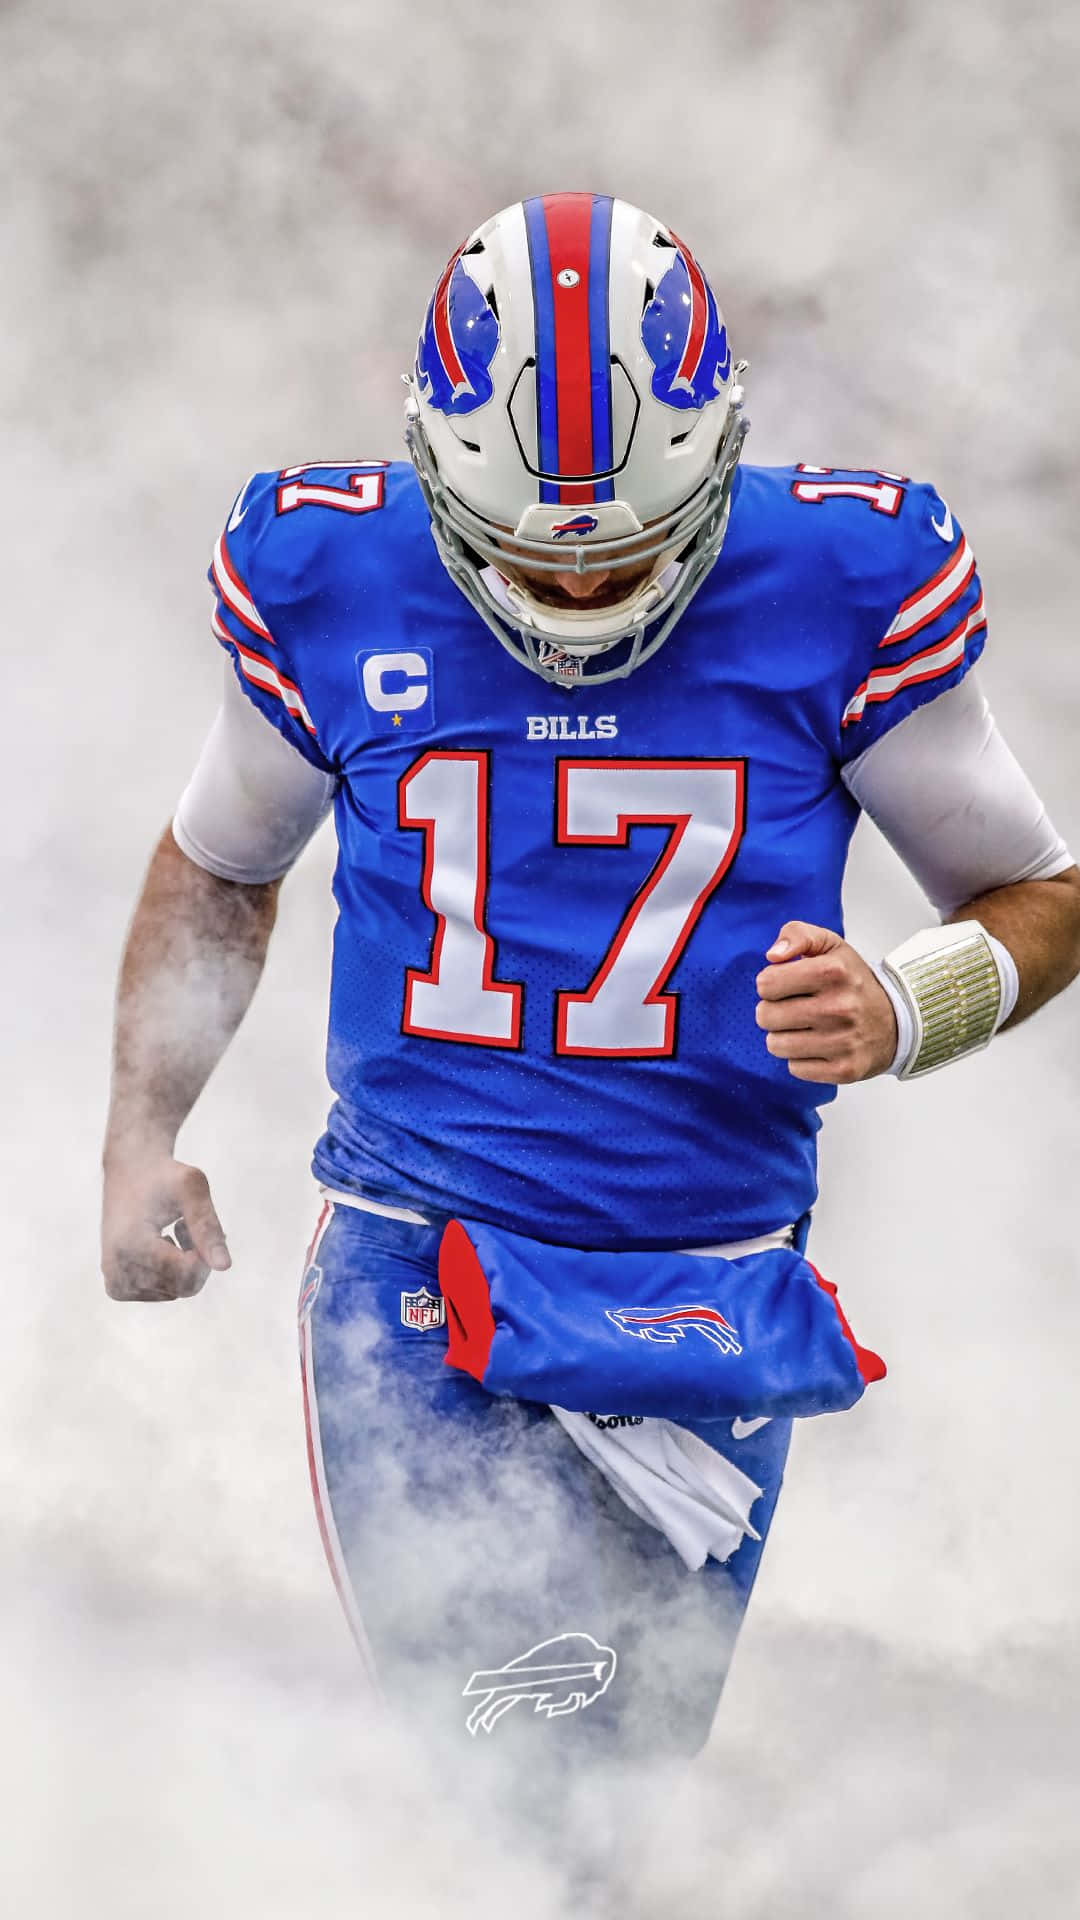 Buffalo Bills Number17 Player In Action Wallpaper